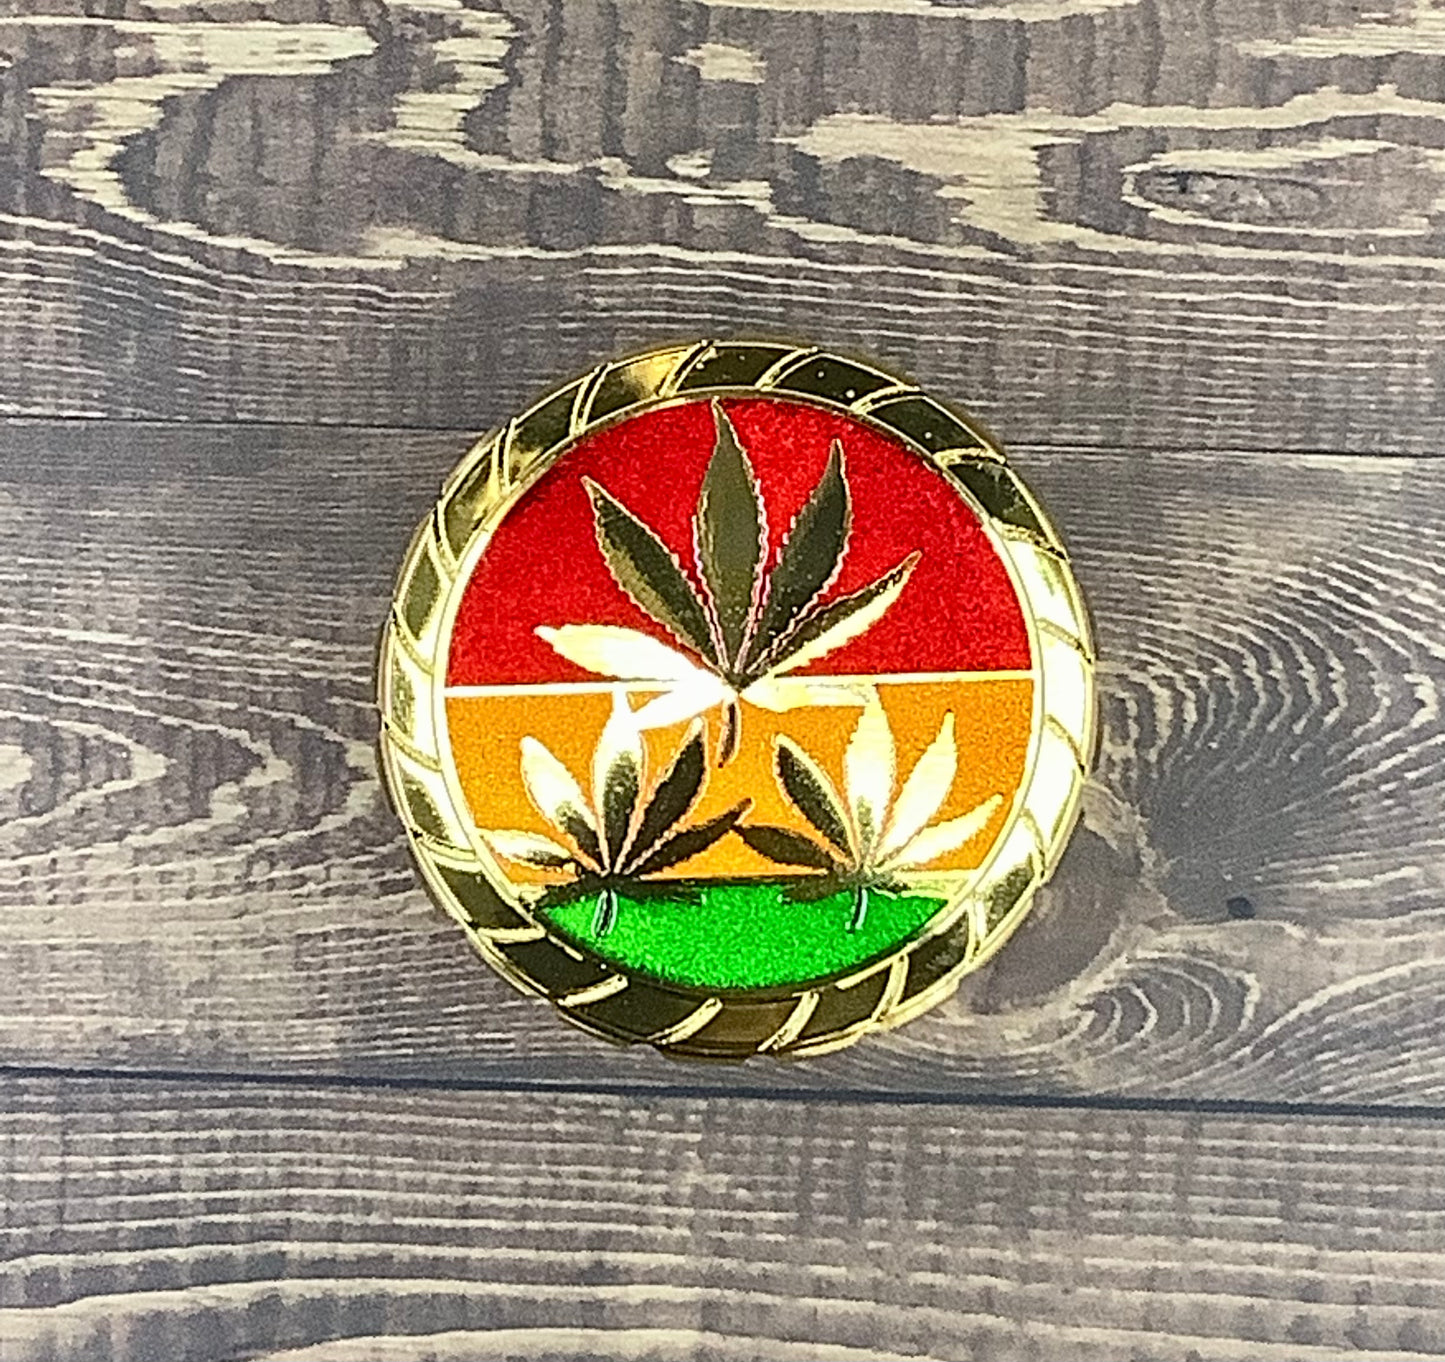 2 Inch Gold Leaf W/ Rasta Color Metal Grinder yoga smokes yoga studio, delivery, delivery near me, yoga smokes smoke shop, find smoke shop, head shop near me, yoga studio, headshop, head shop, local smoke shop, psl, psl smoke shop, smoke shop, smokeshop, yoga, yoga studio, dispensary, local dispensary, smokeshop near me, port saint lucie, florida, port st lucie, lounge, life, highlife, love, stoned, highsociety. Yoga Smokes